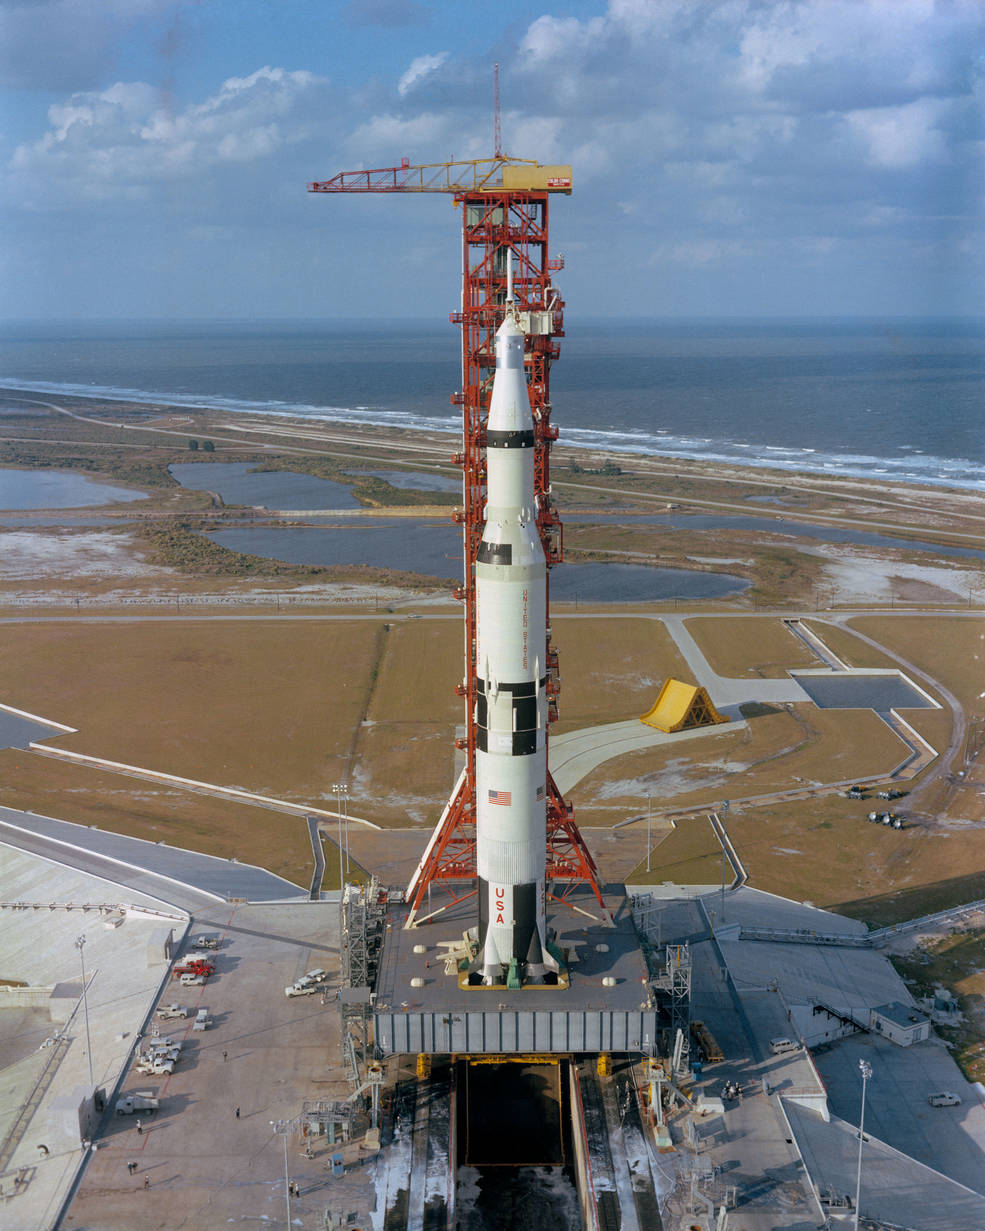 The Apollo 4 rocket is ready for launch at Pad 39A at Kennedy Space Center on August 26, 1967.